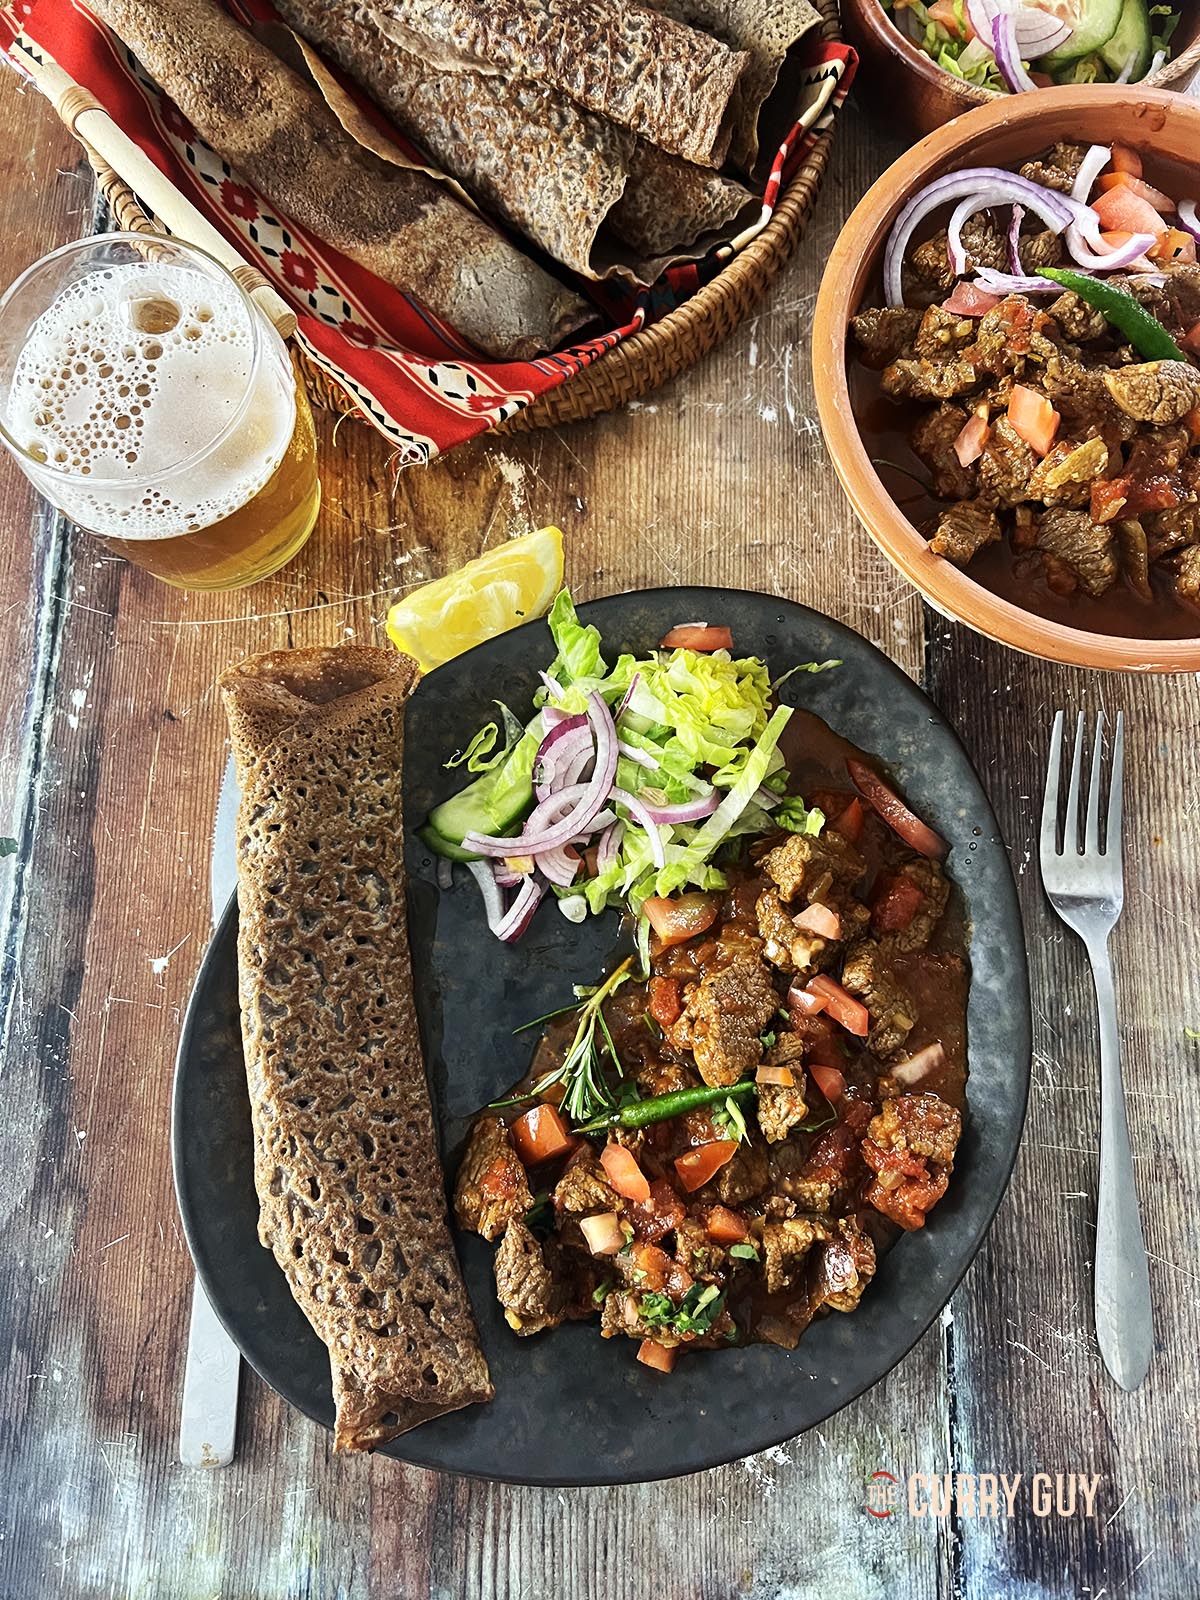 Beef tibs served with injera bread at the table.